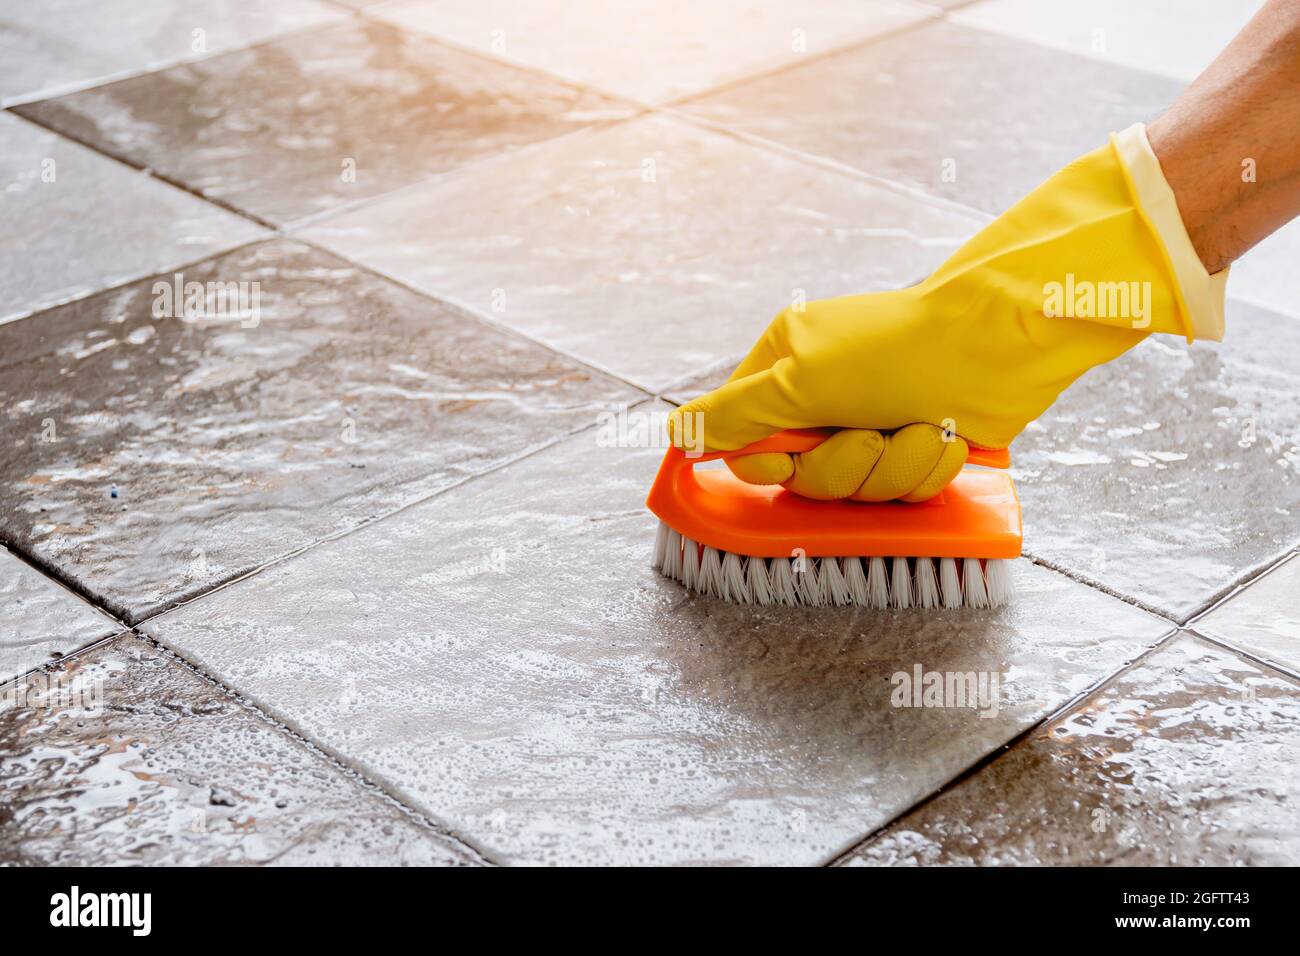 Hands wearing yellow rubber gloves are using a plastic floor scrubber to  scrub the tile floor with a floor cleaner Stock Photo - Alamy